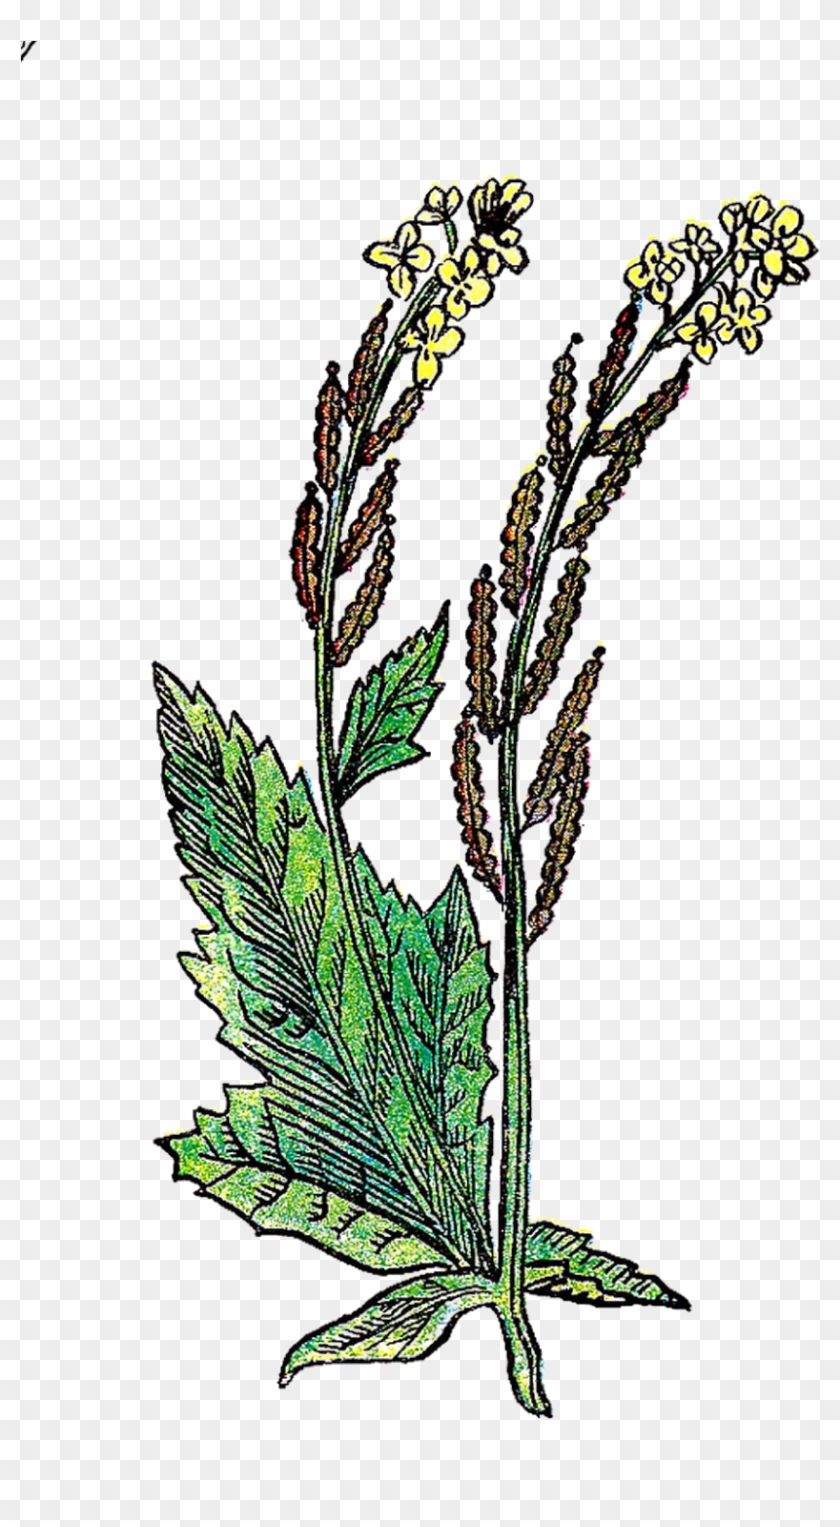 This Is A Wonderful, Vintage Herb Graphic Of The Mustard - Clip Art #435677